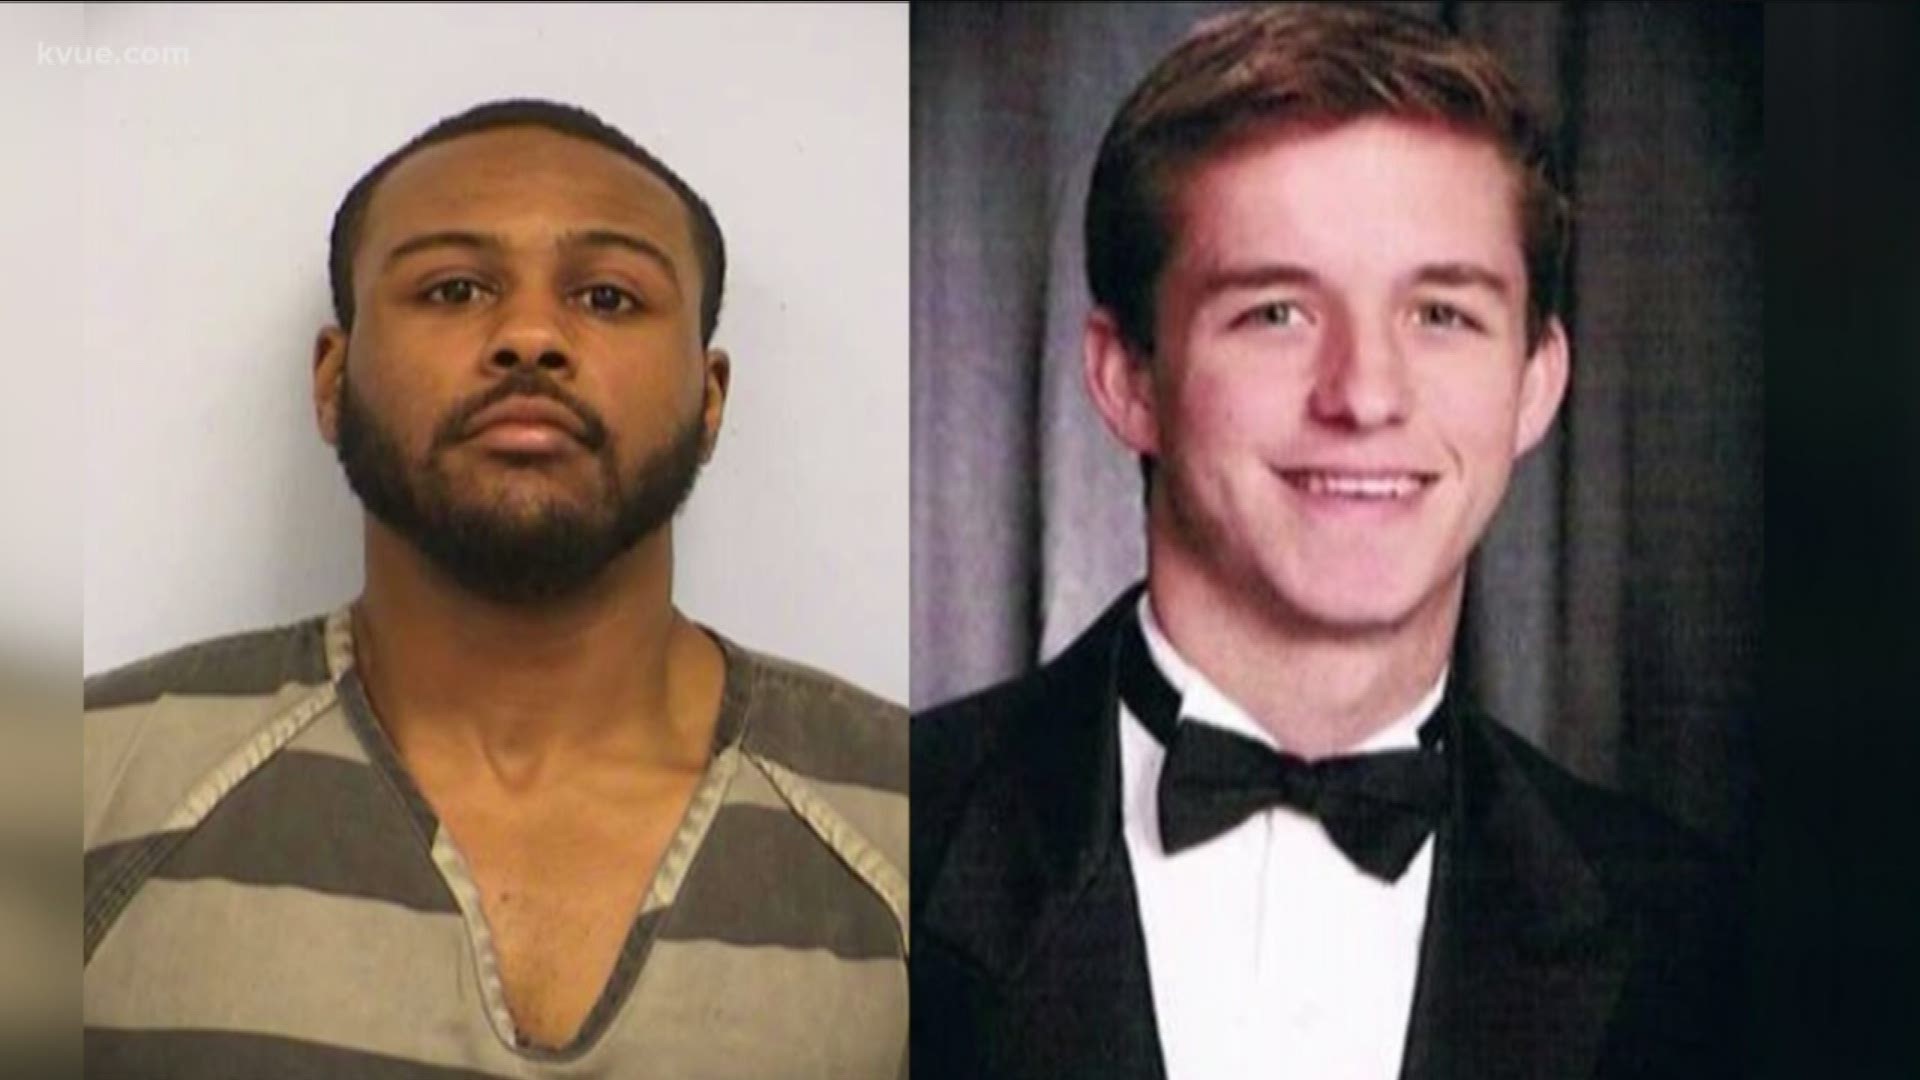 A hearing is set next month for the man accused of murdering a University of Texas student last year.